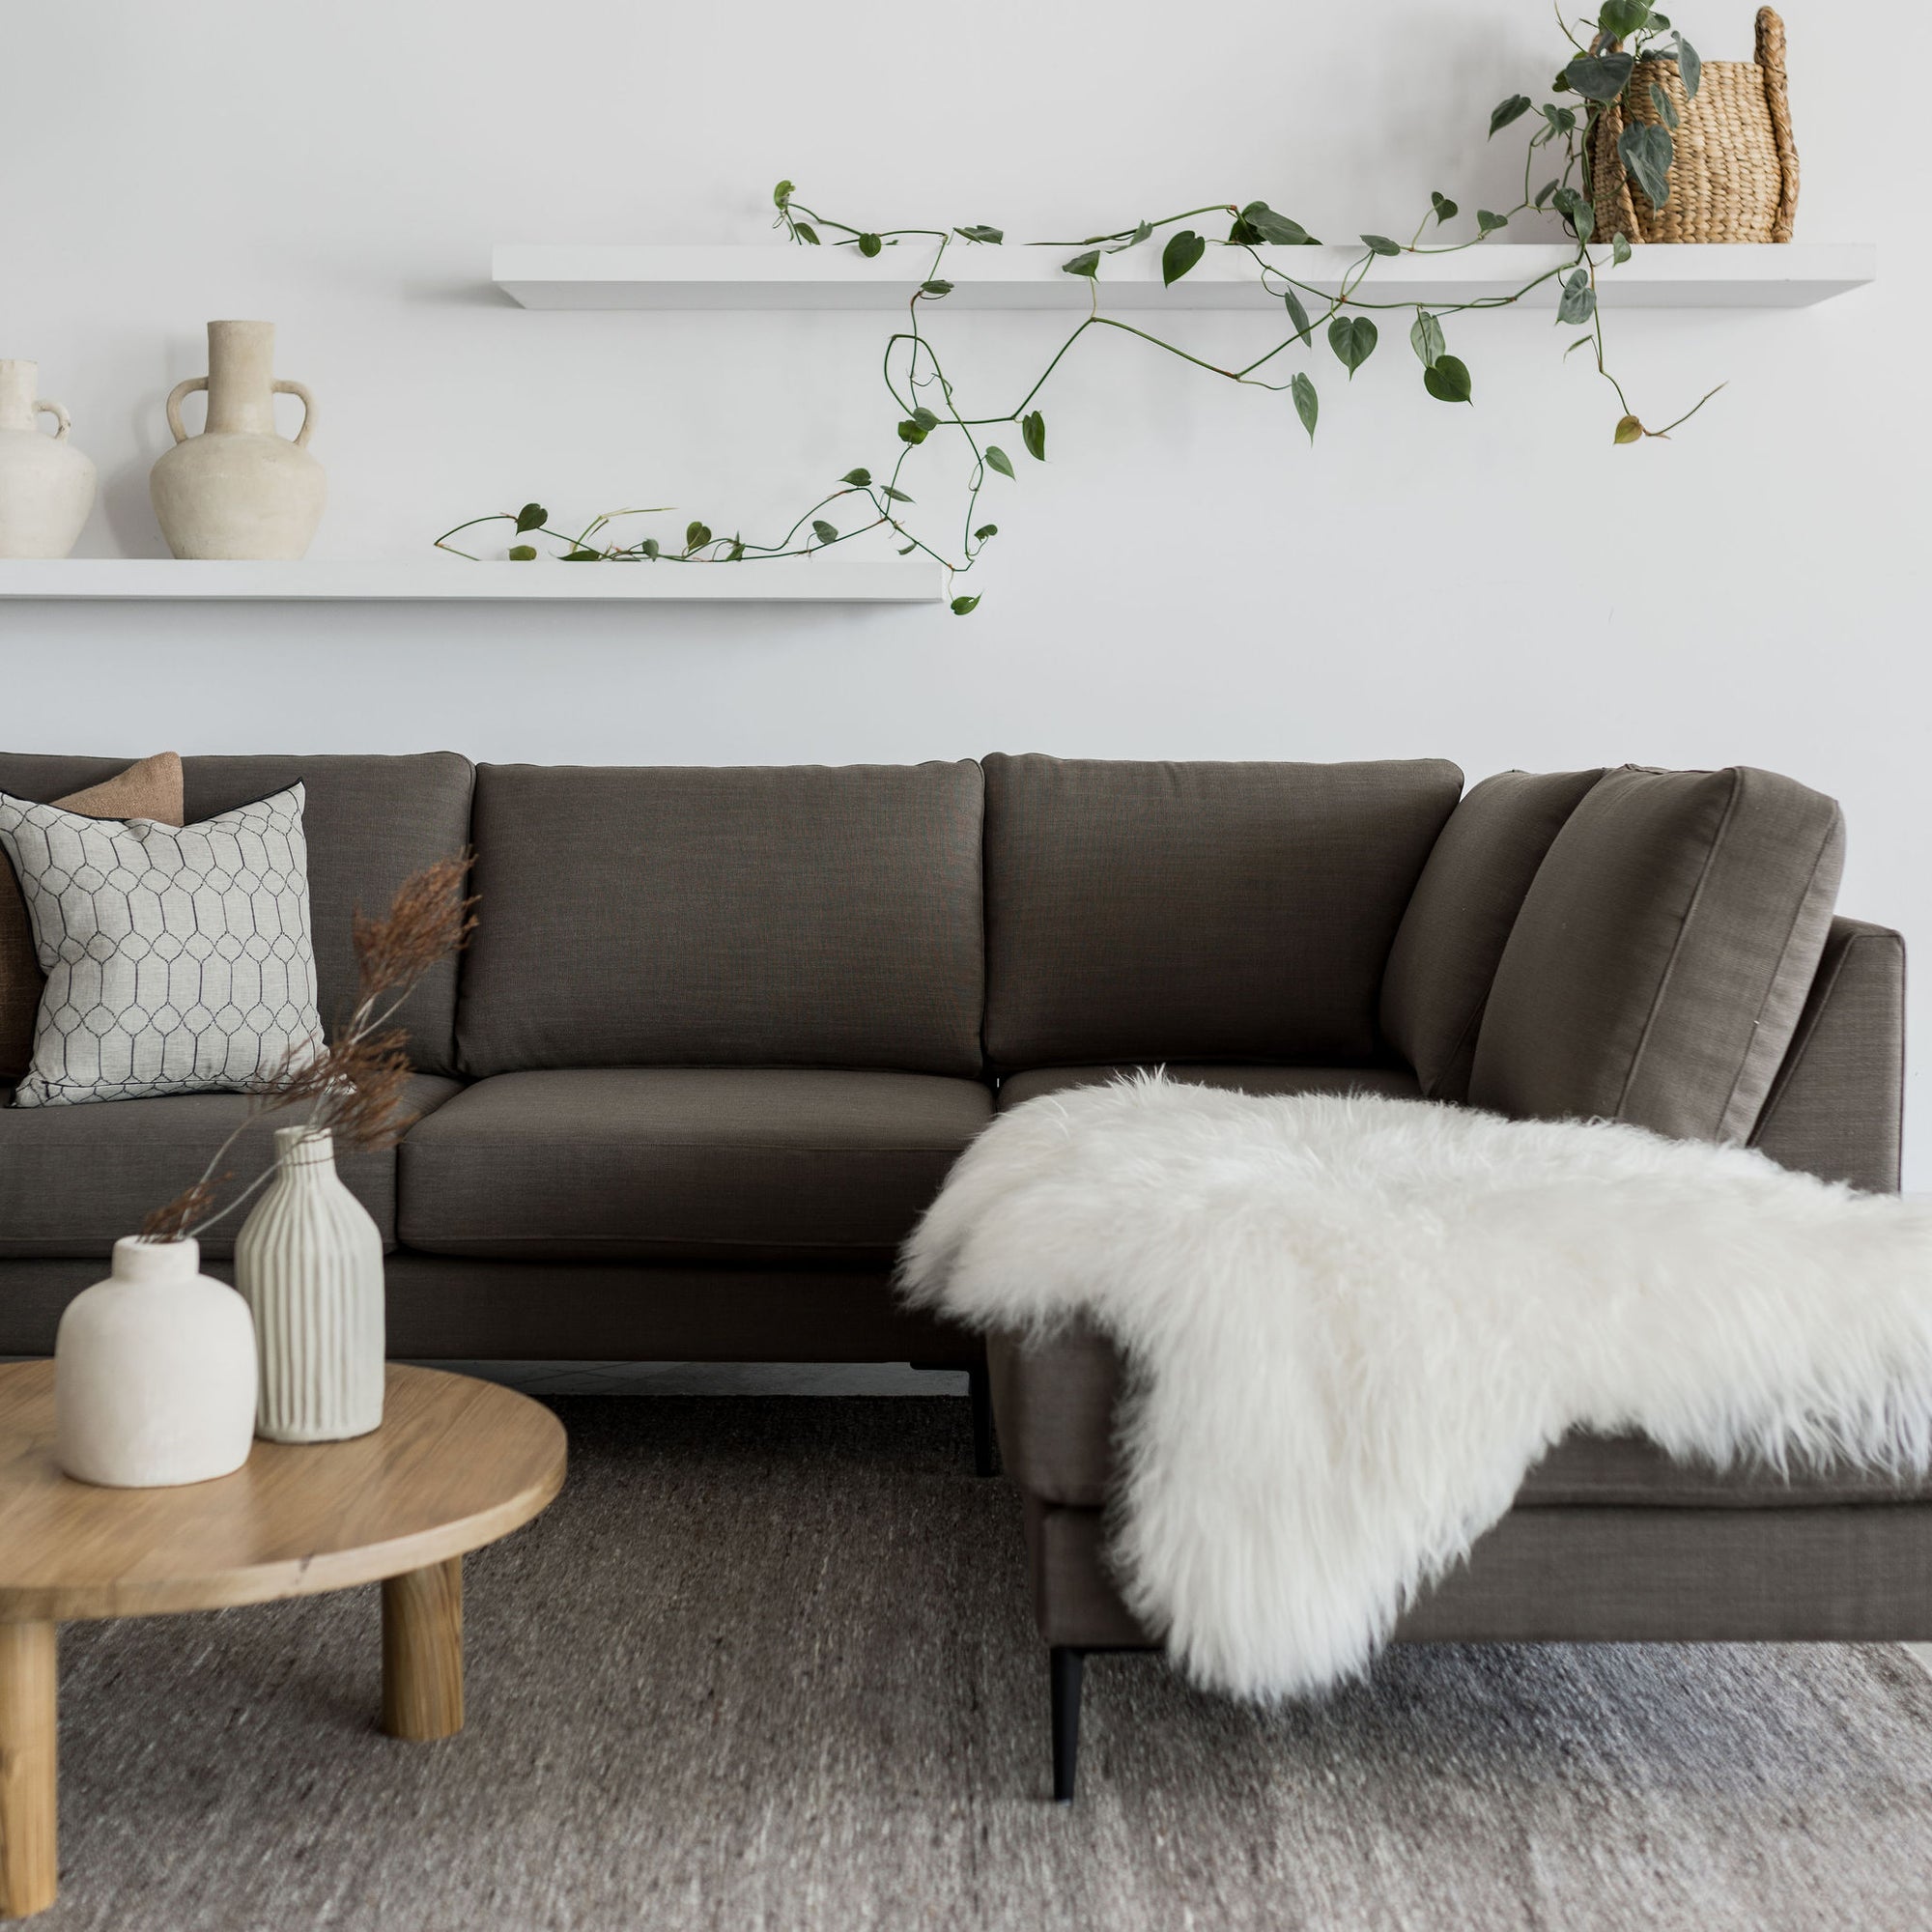 corner sofa with chaise from corcovado store new zealand online and also a white icelandic sheepskin throw rug 